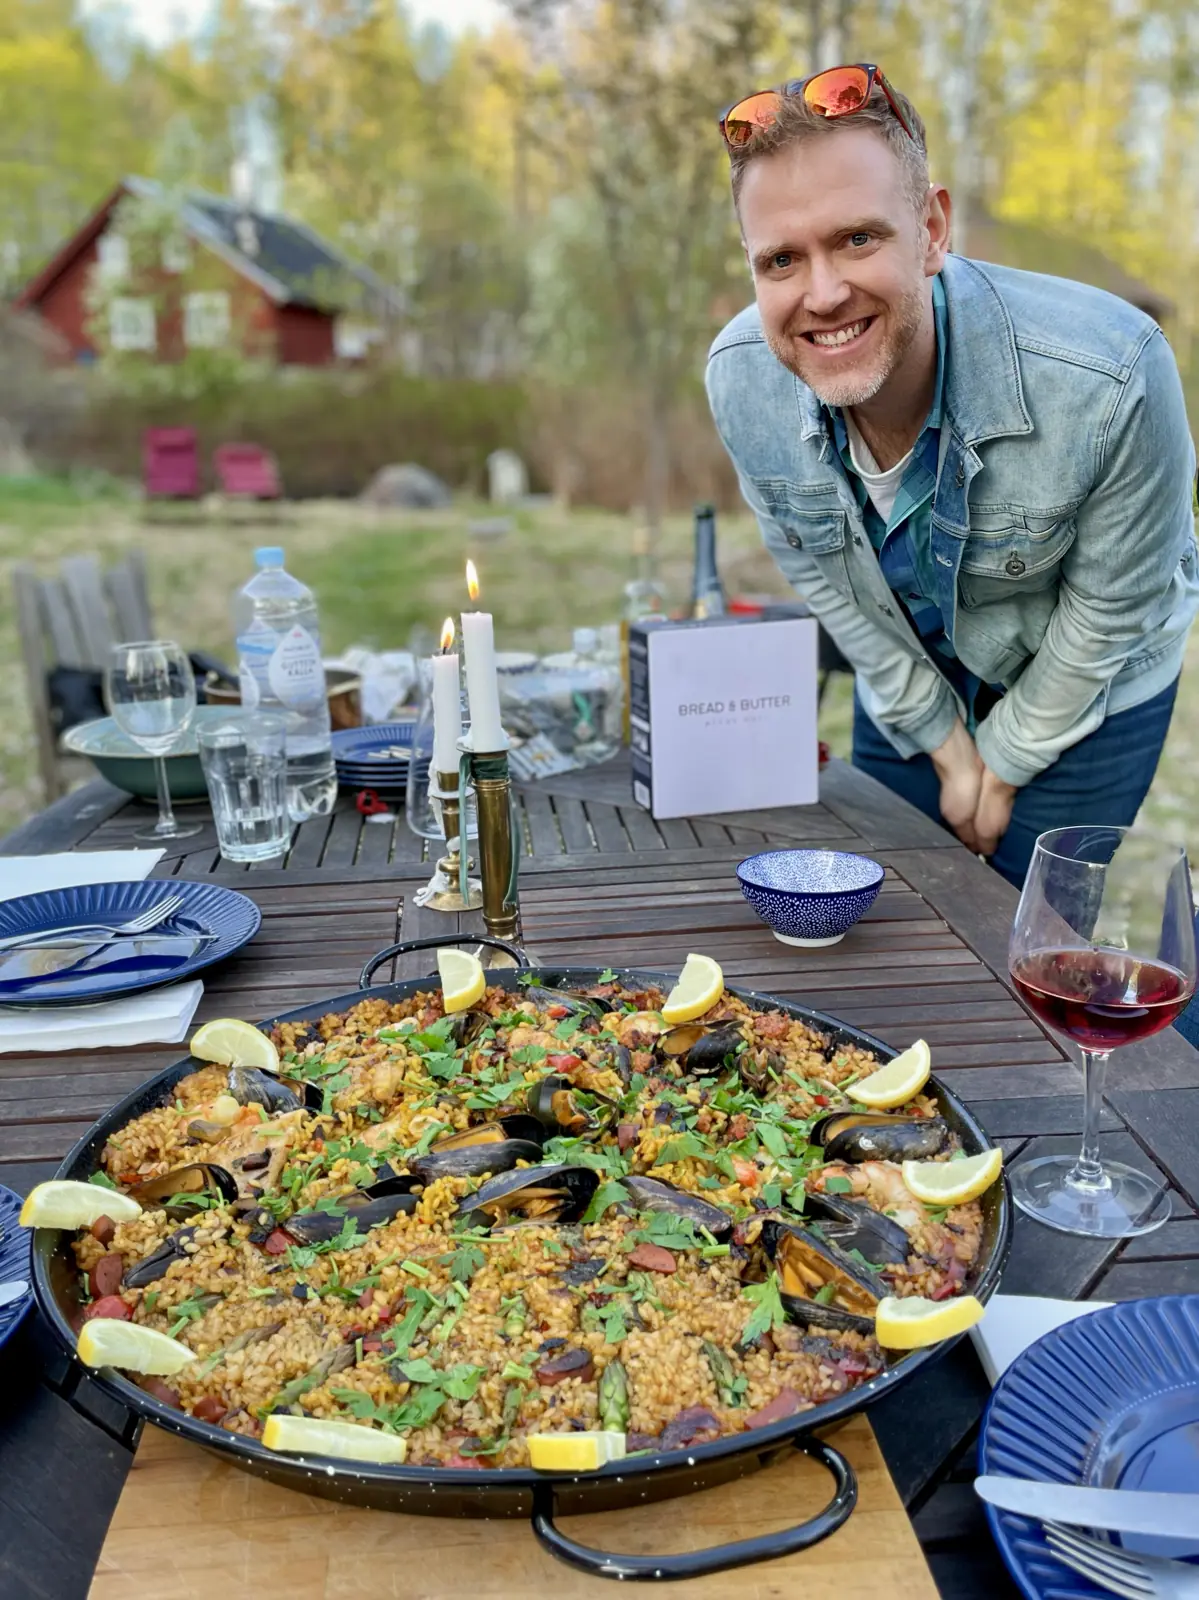 Arthur standing over a table with a big paella in the foreground